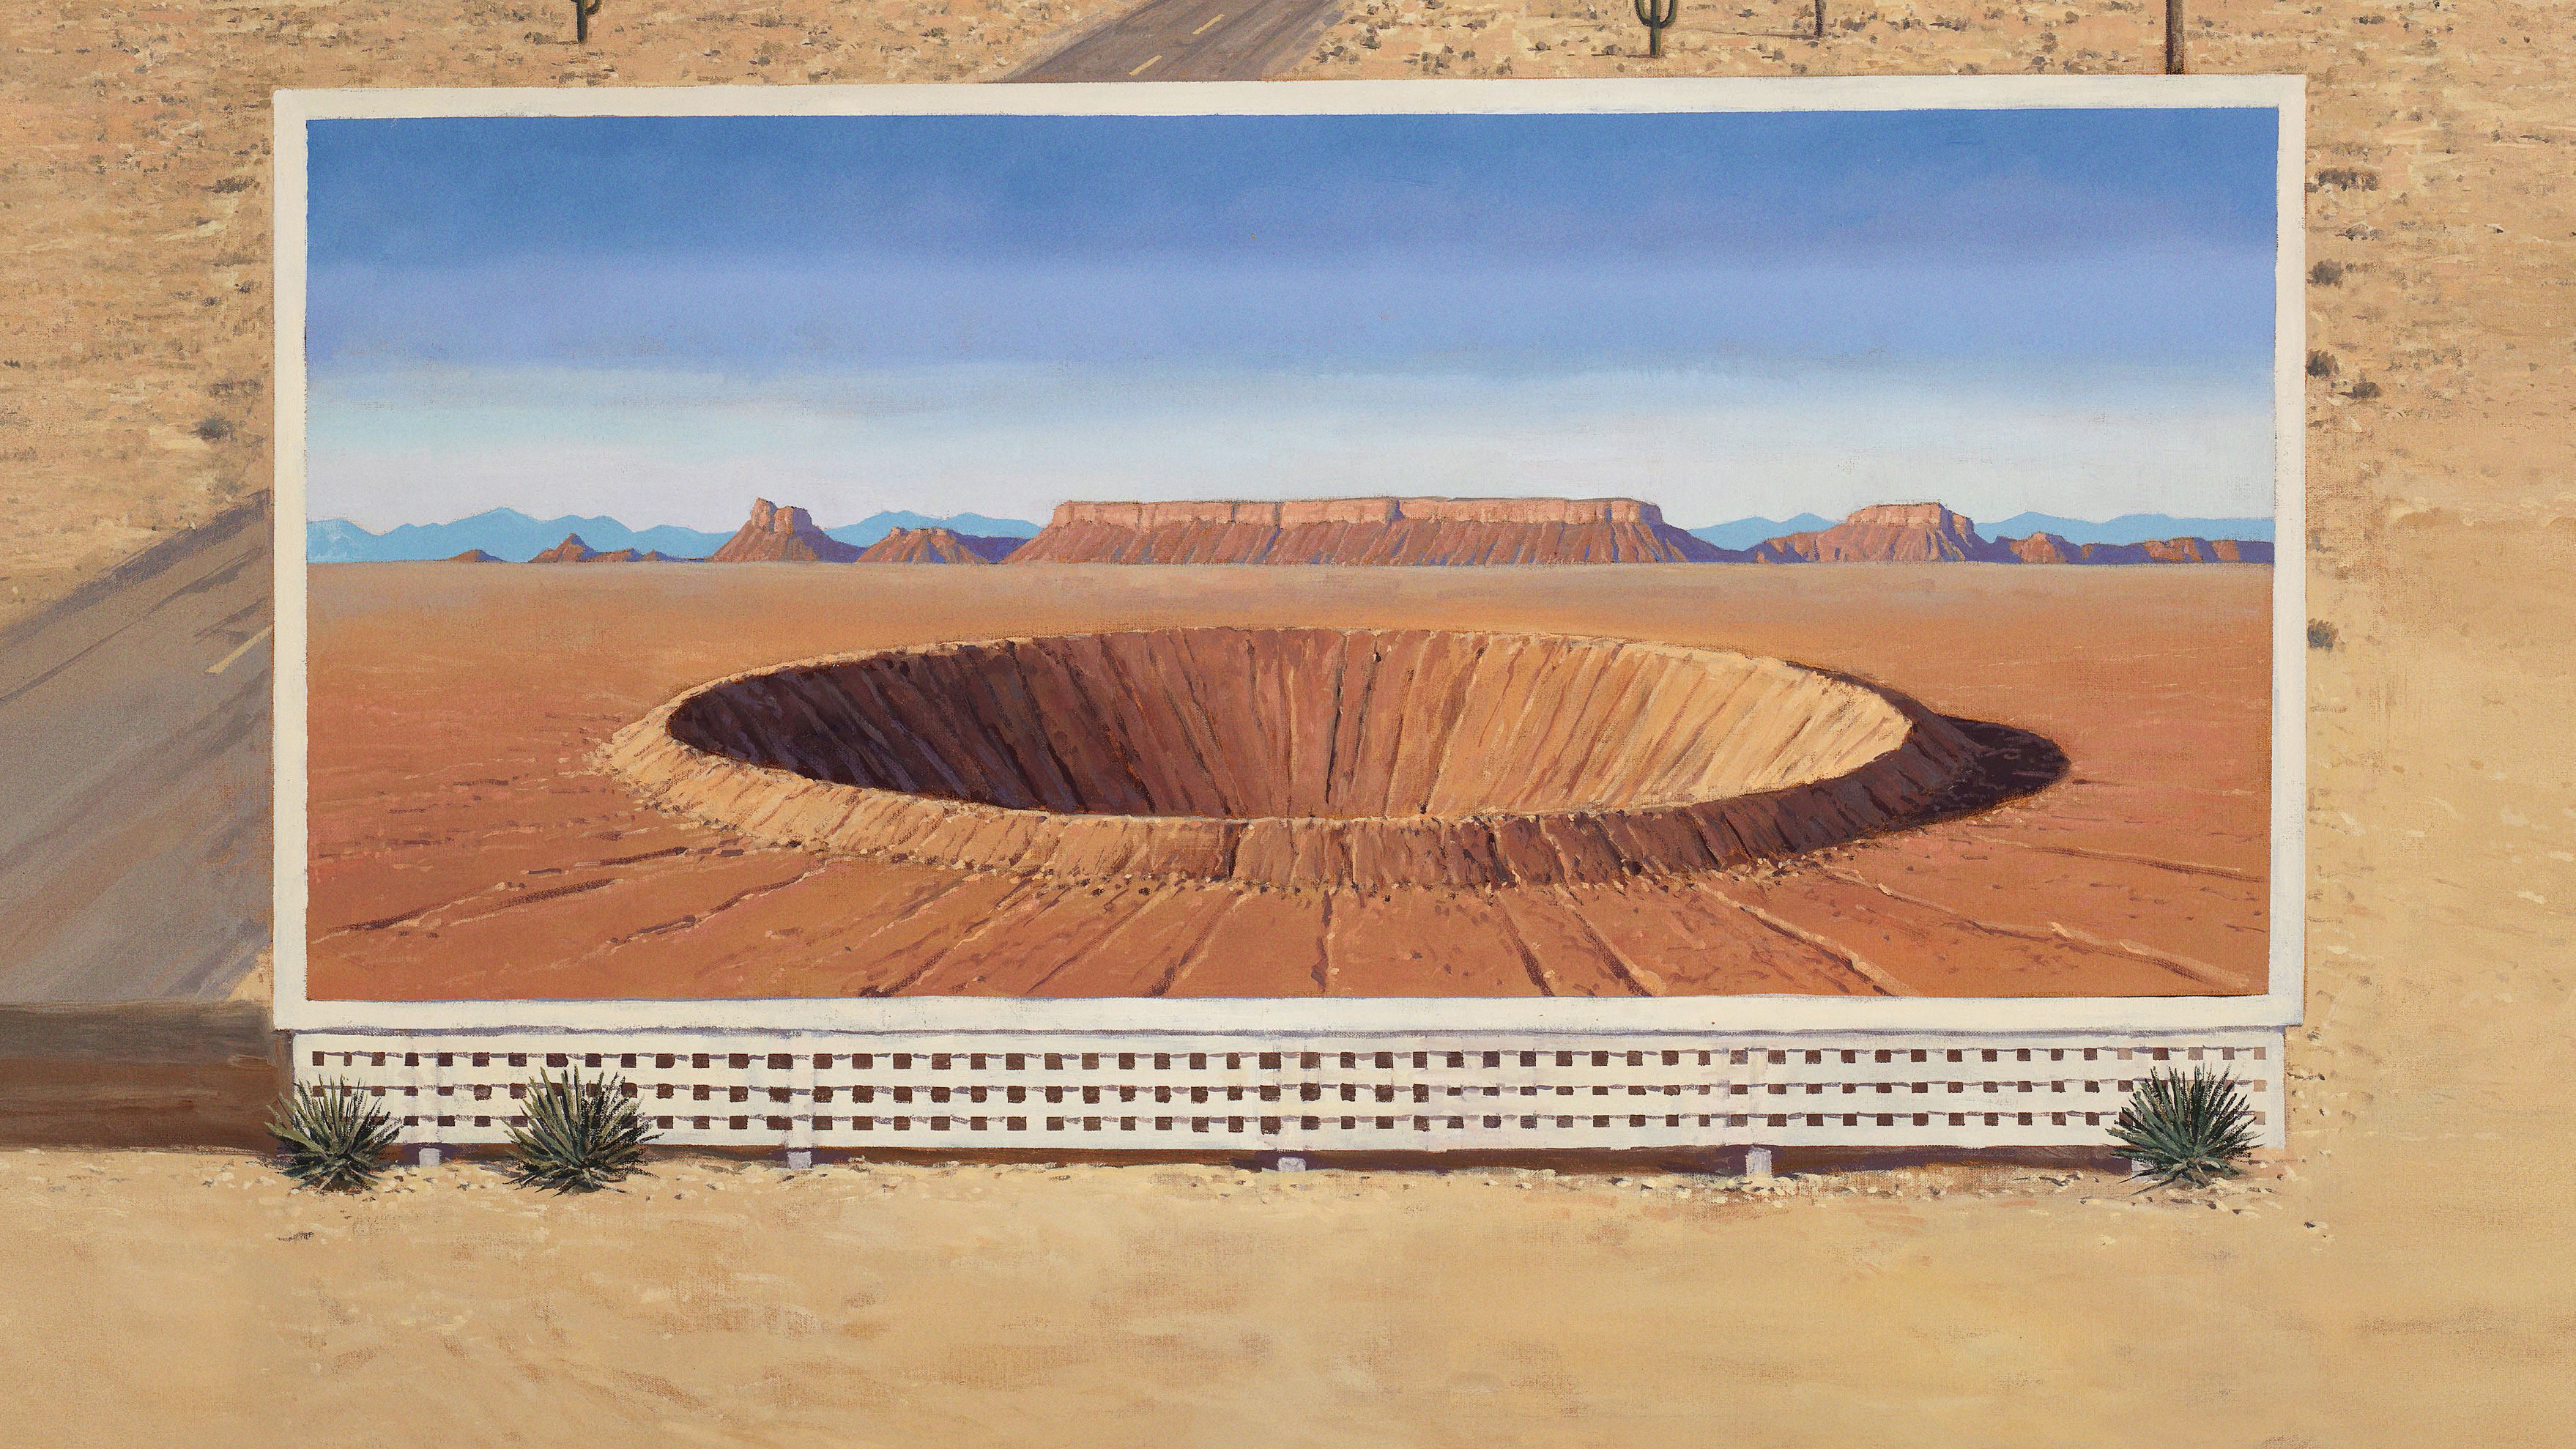 Asteroid City Movie Poster Movies Wes Anderson Digital Art Desert Canyon Rock Formation Asteroid Bil 3517x1978